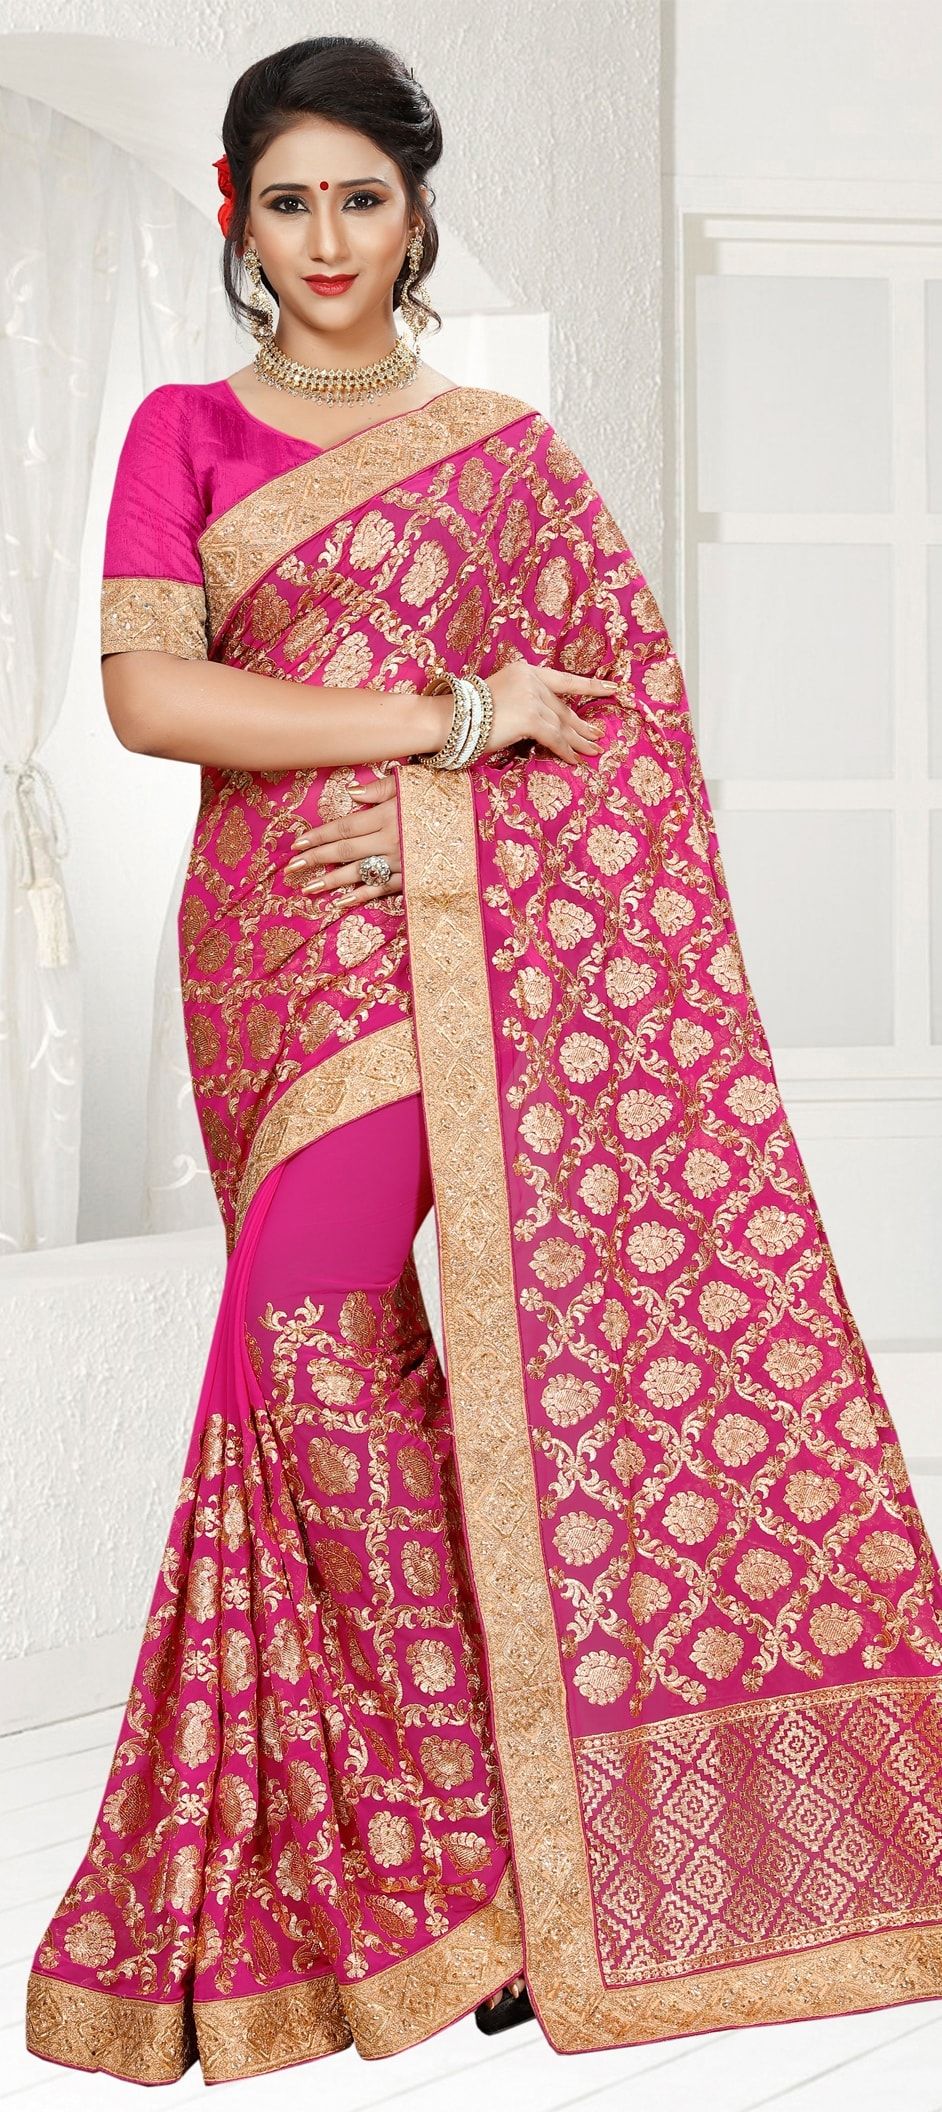 Achieve that Perfect Bridal Saree Look with These Styling Tips